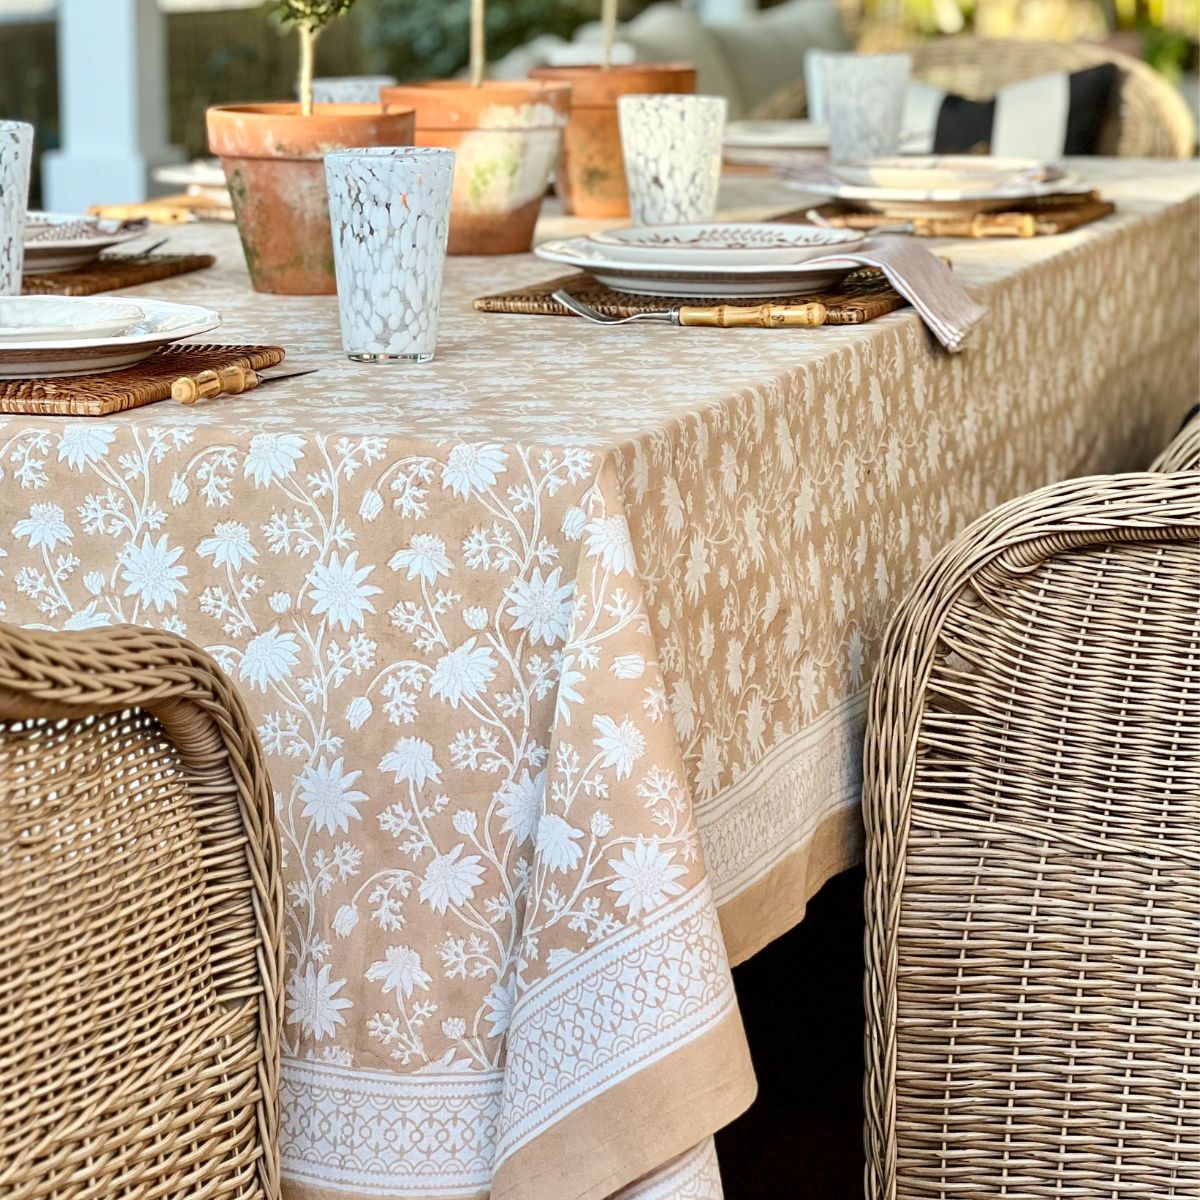 Flannel flower light brown Tablecloth  ©